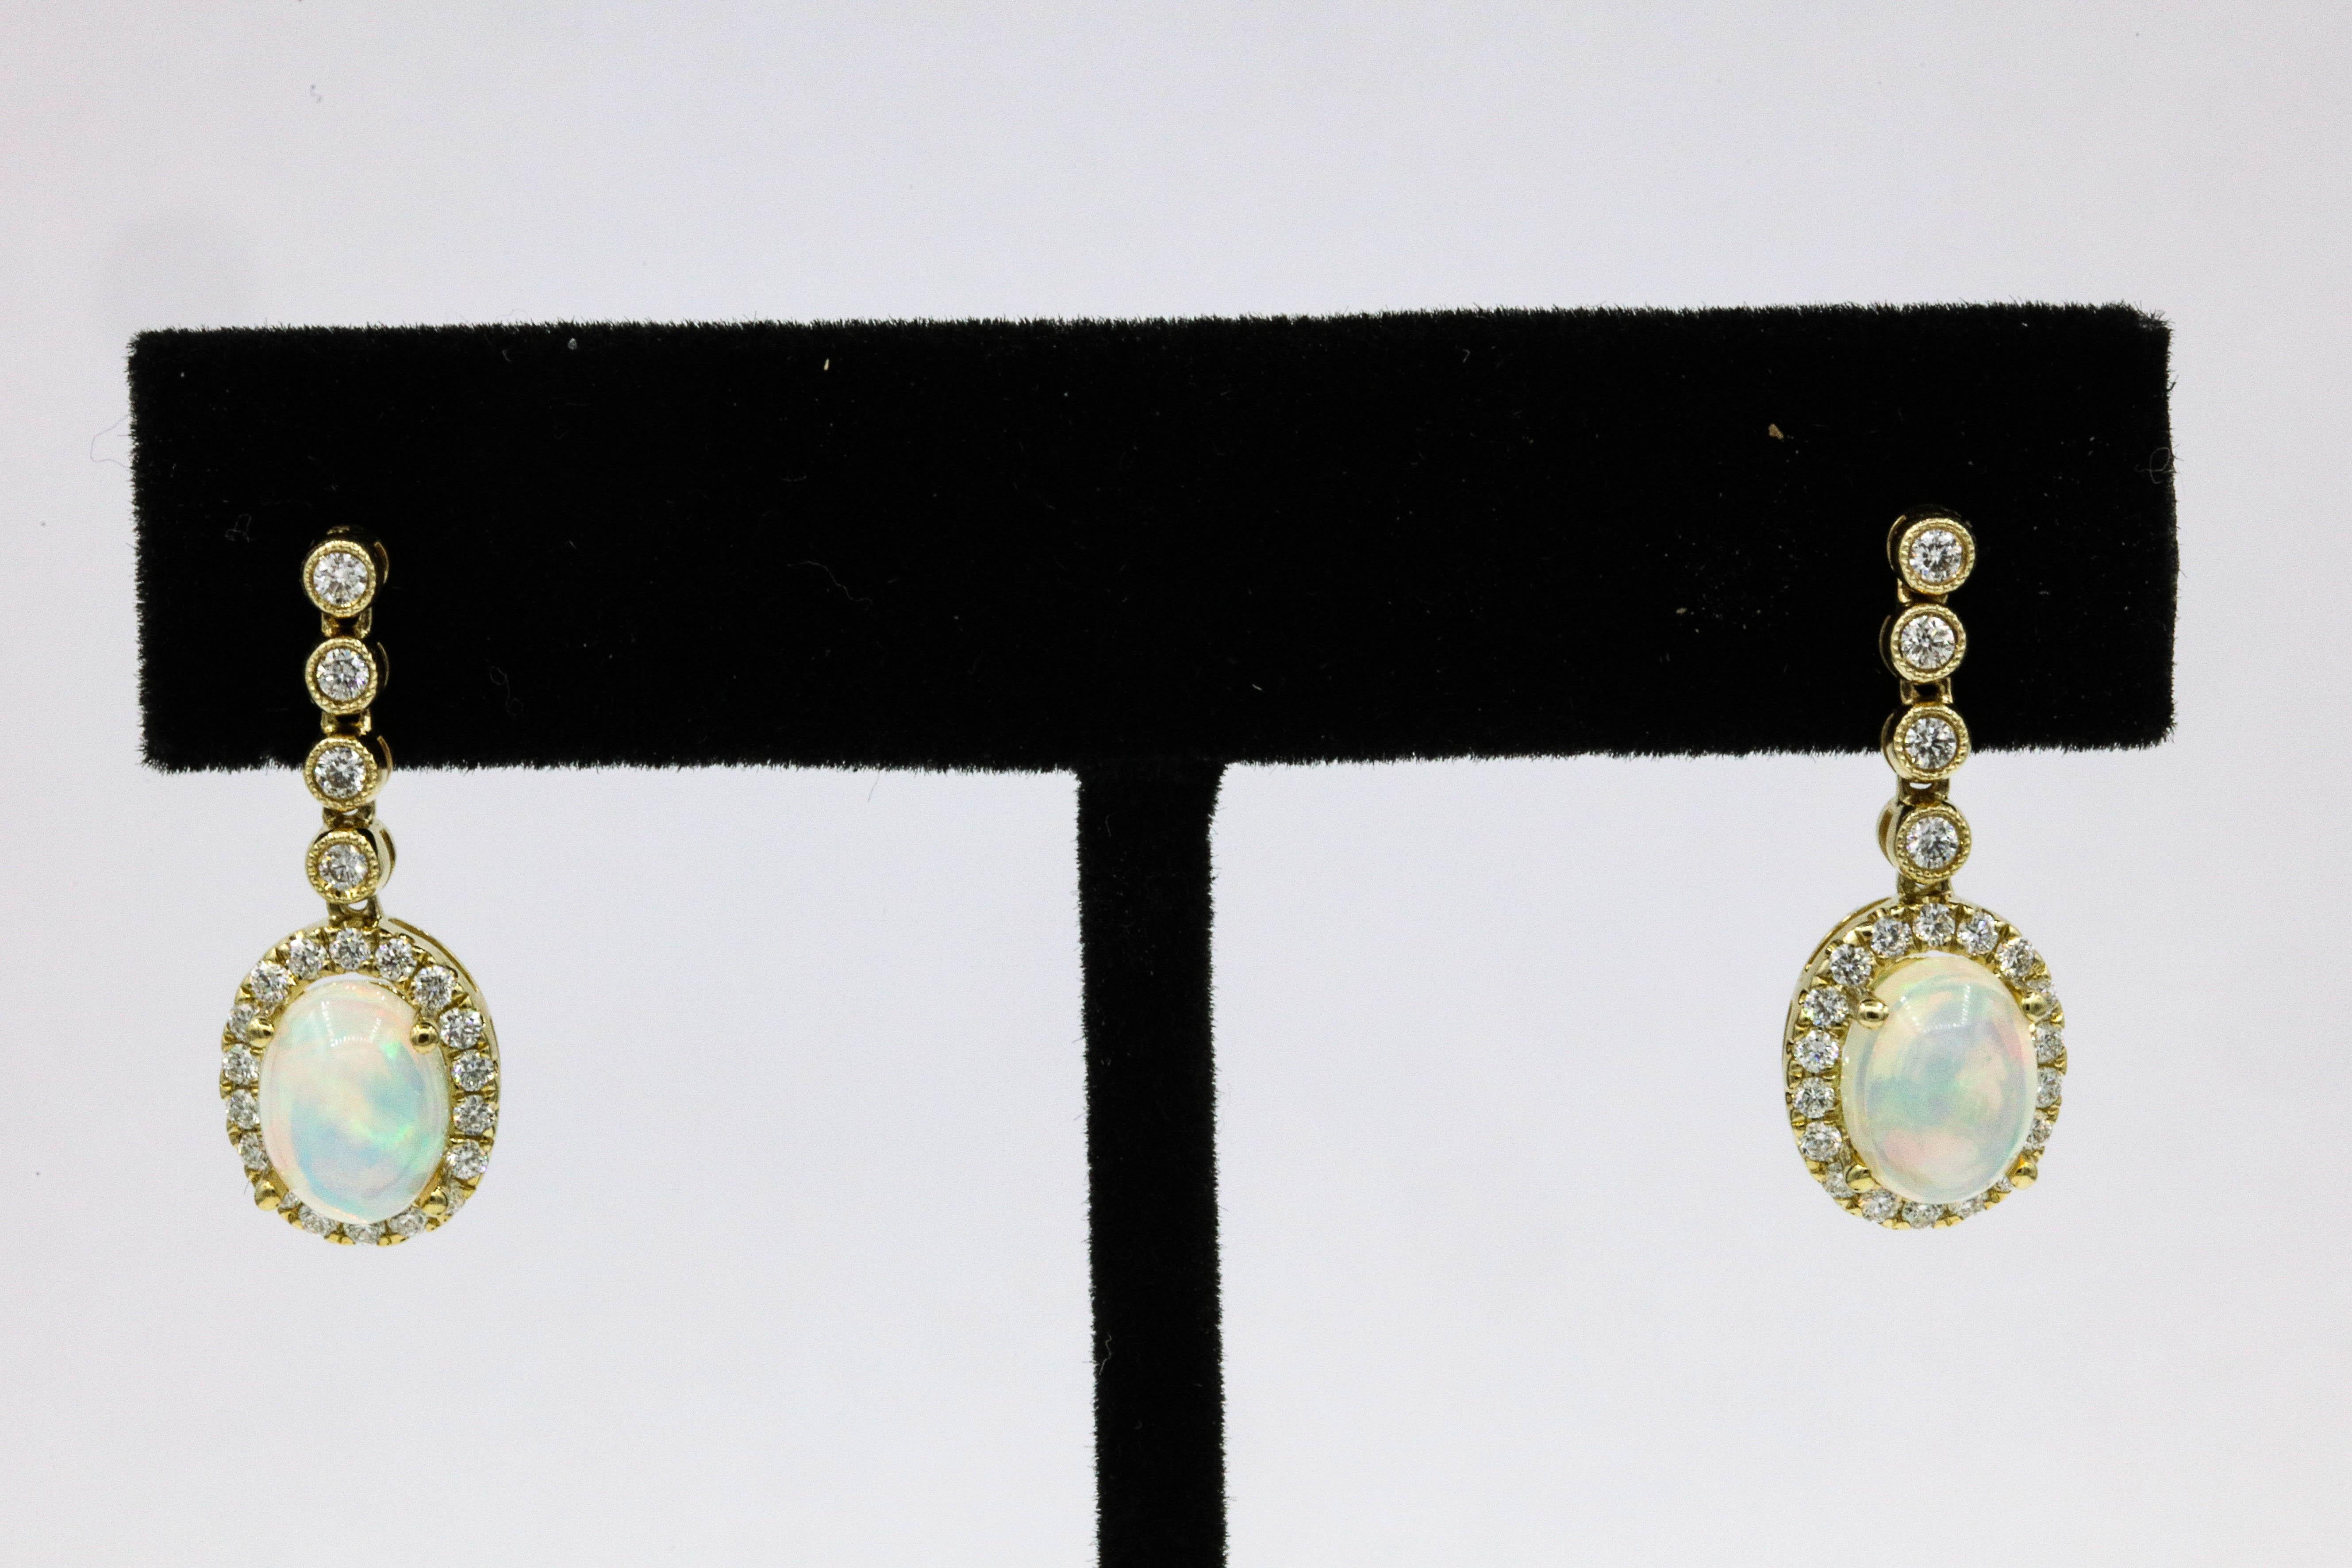 14k Yellow gold drop earrings featuring two Ethiopian Opals, 1.78 carats surrounded by round brilliants weighing 0.54 carats. 
Color G-H
Clarity SI